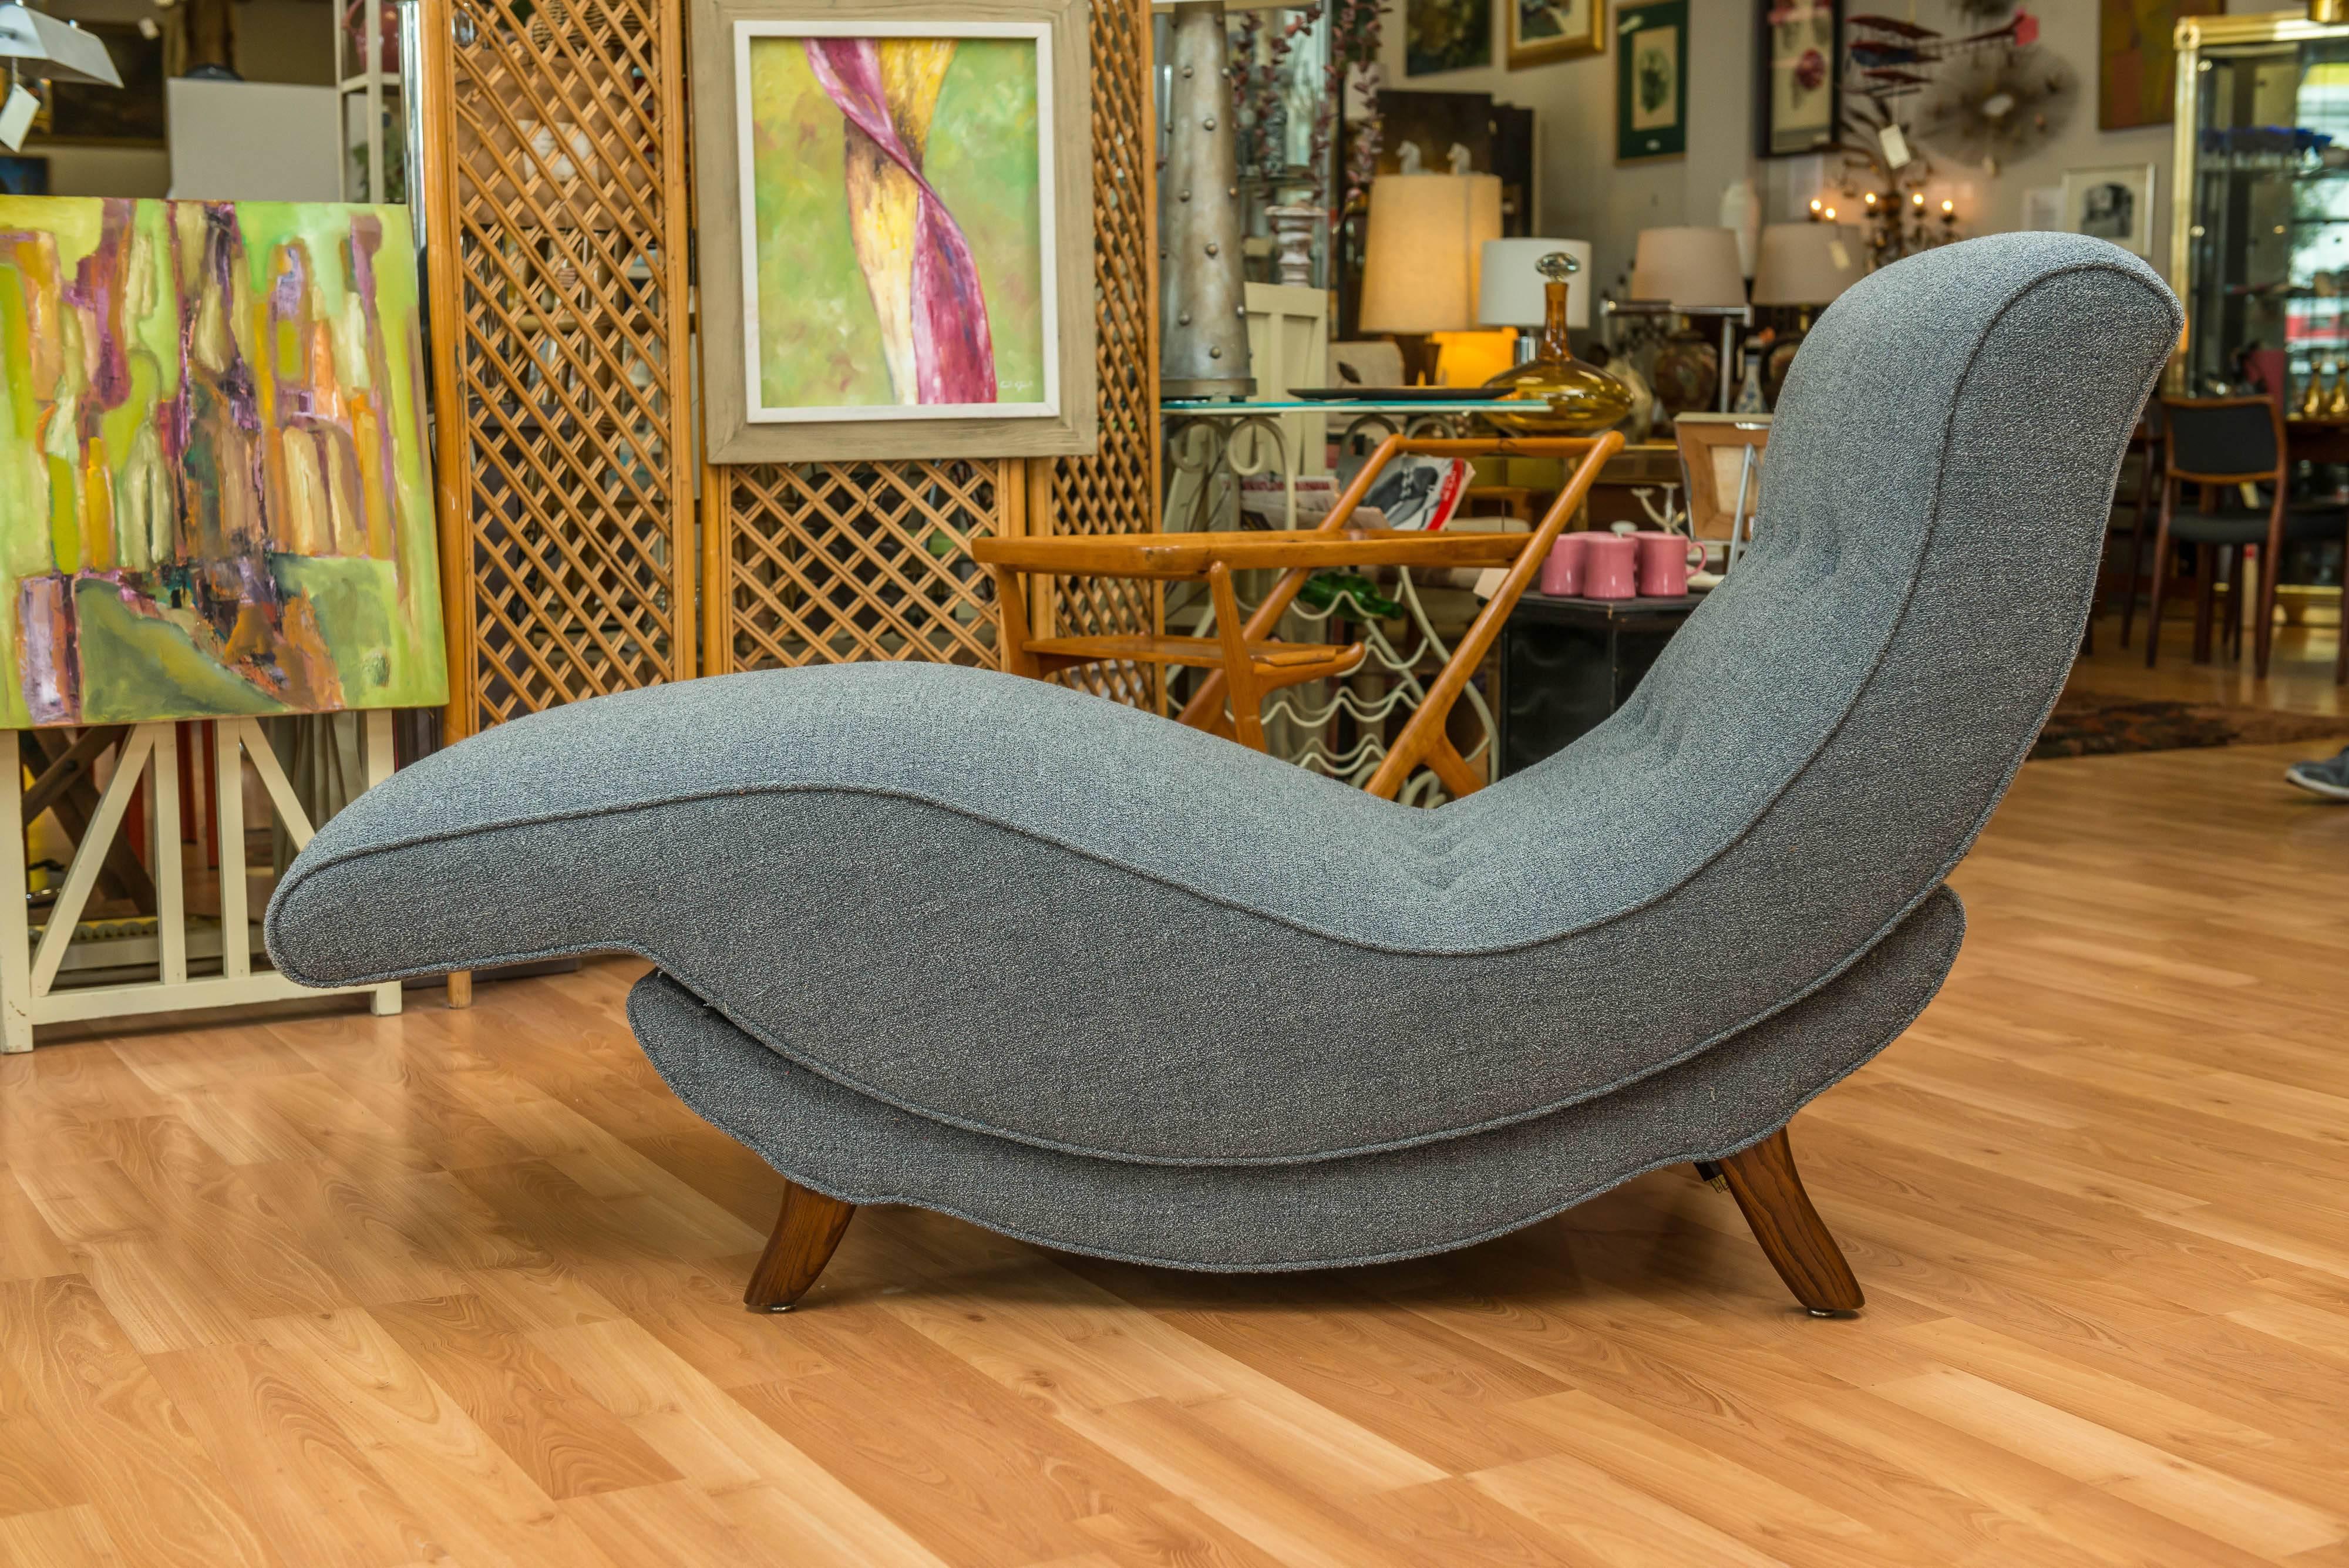 Classic fifties, Contour lounge chair, been reupholstered in a grey wool. It vibrates and reclines back, then goes forward. A very comfortable lounger, perfect for those lazy Saturday afternoons.